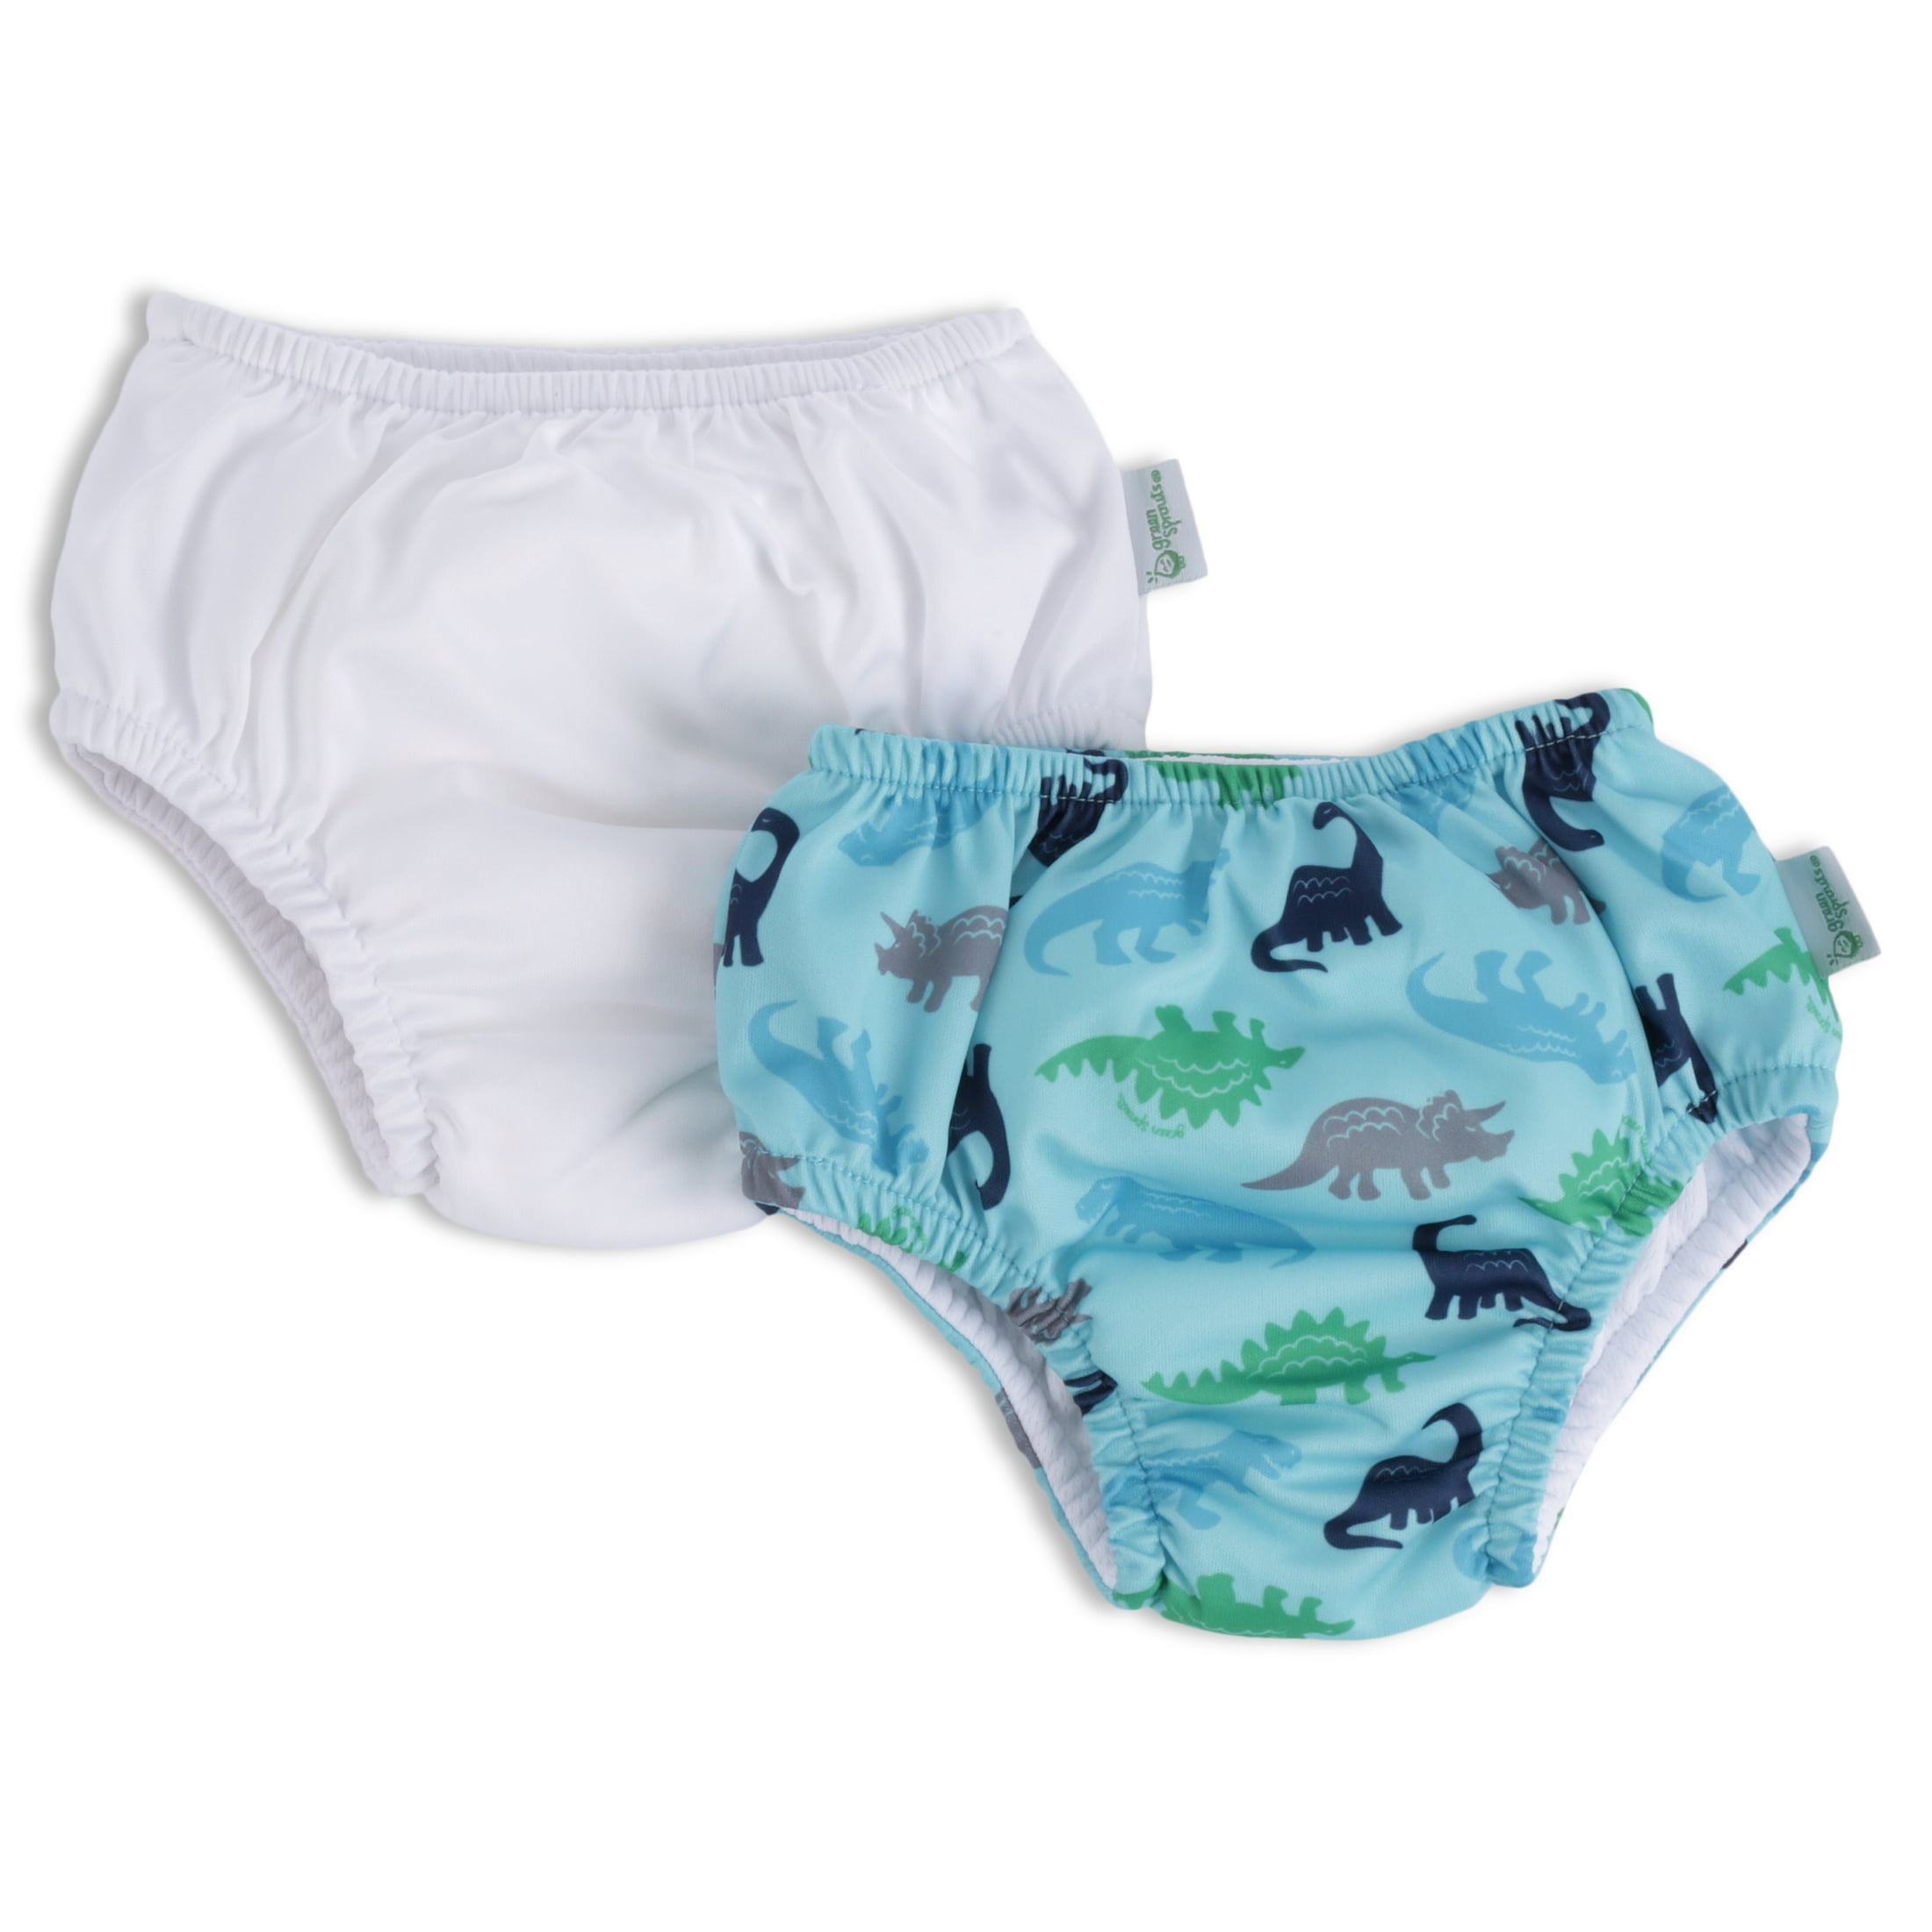 Phogary Boys Baby Snap Reusable Absorbent Swimsuit Diaper 2-pack for 6.6-33lbs 